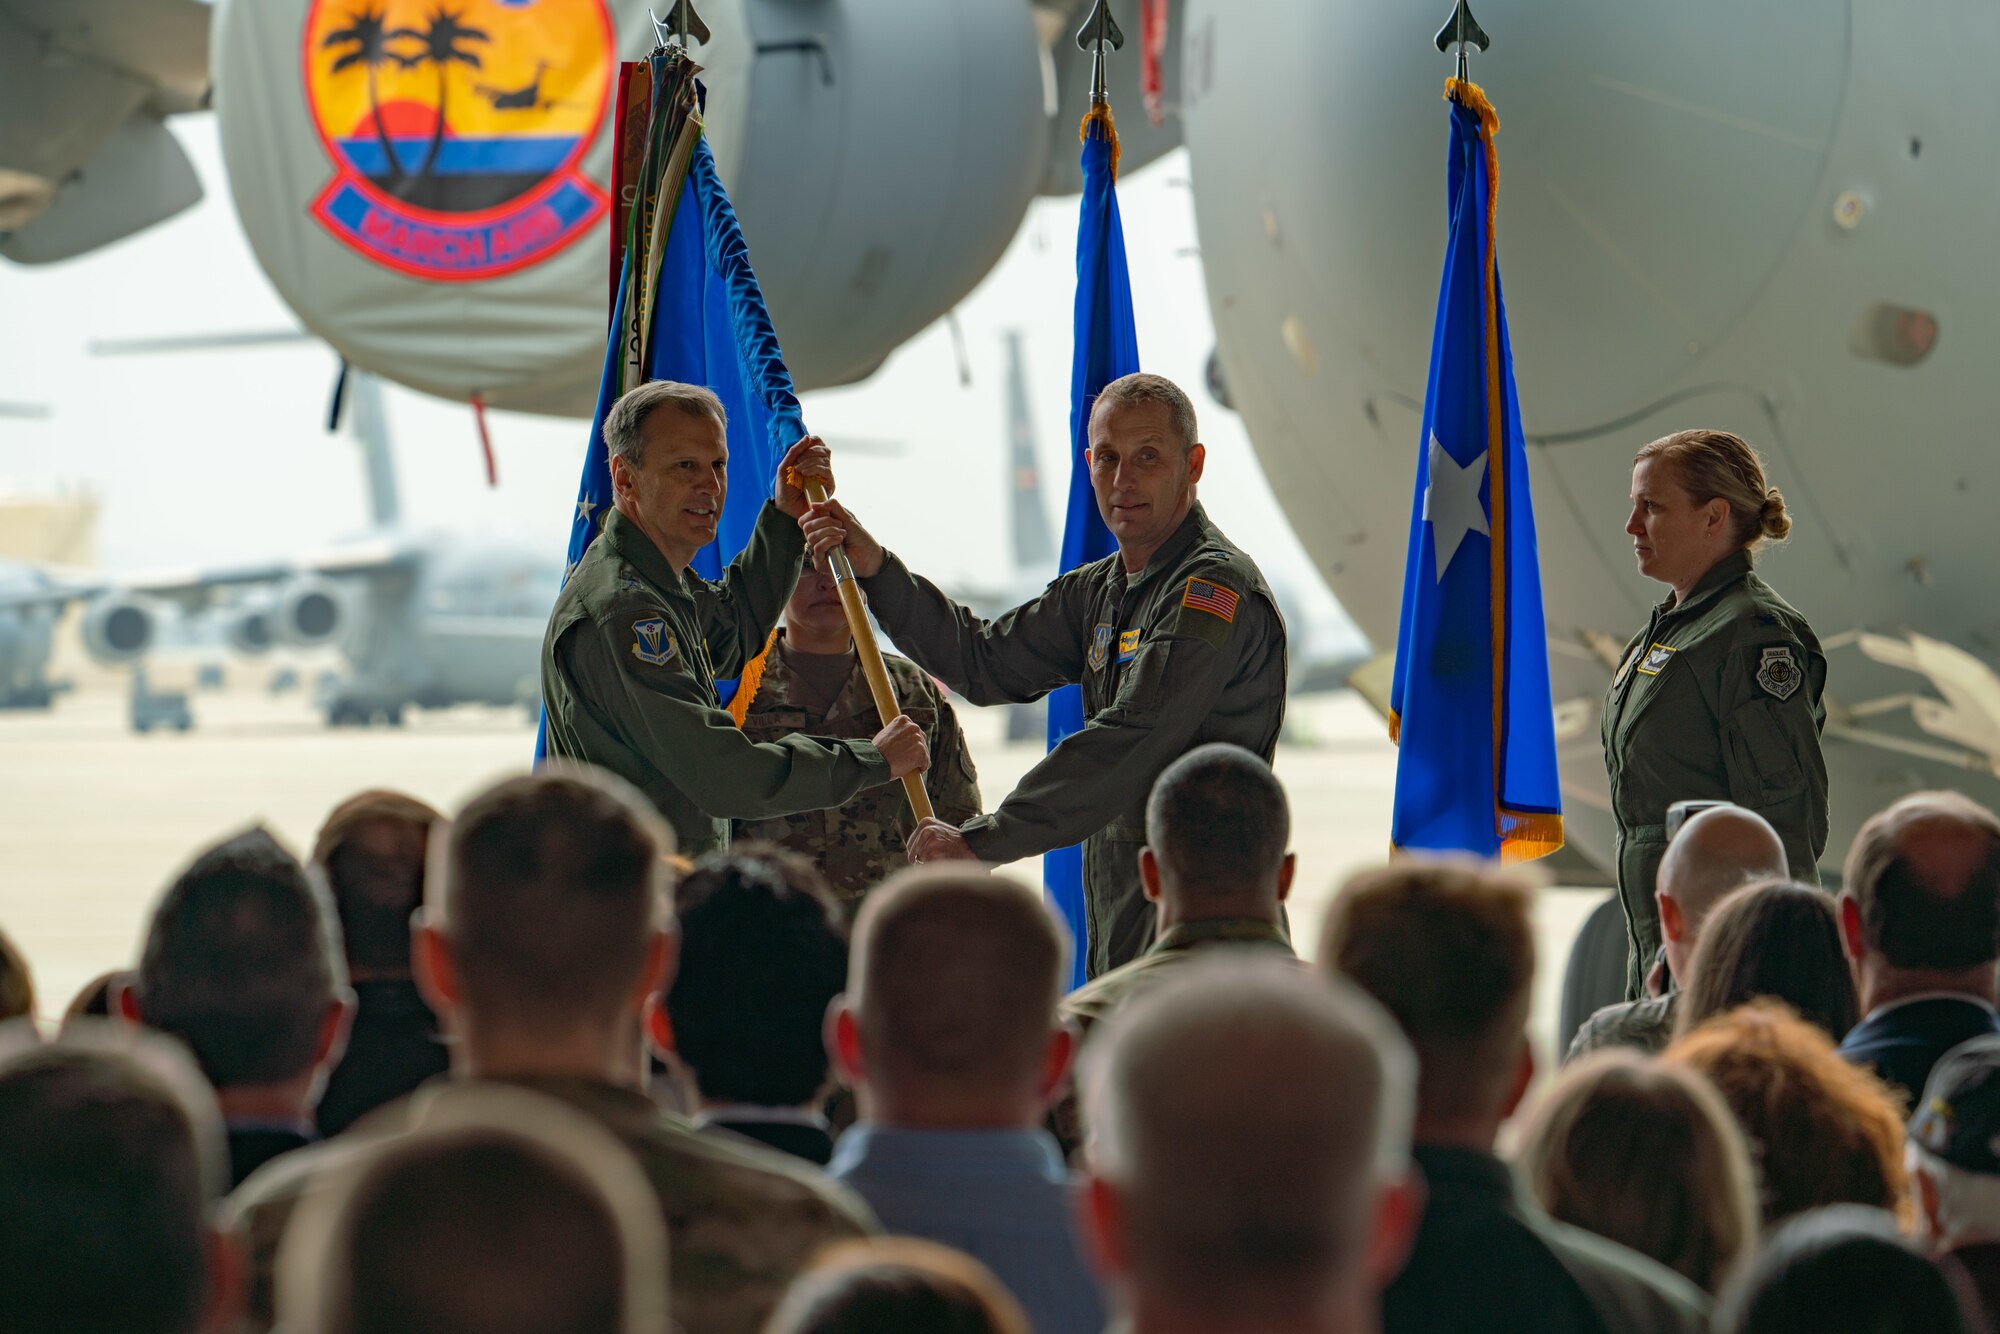 March Field continues to make history with first female base commander